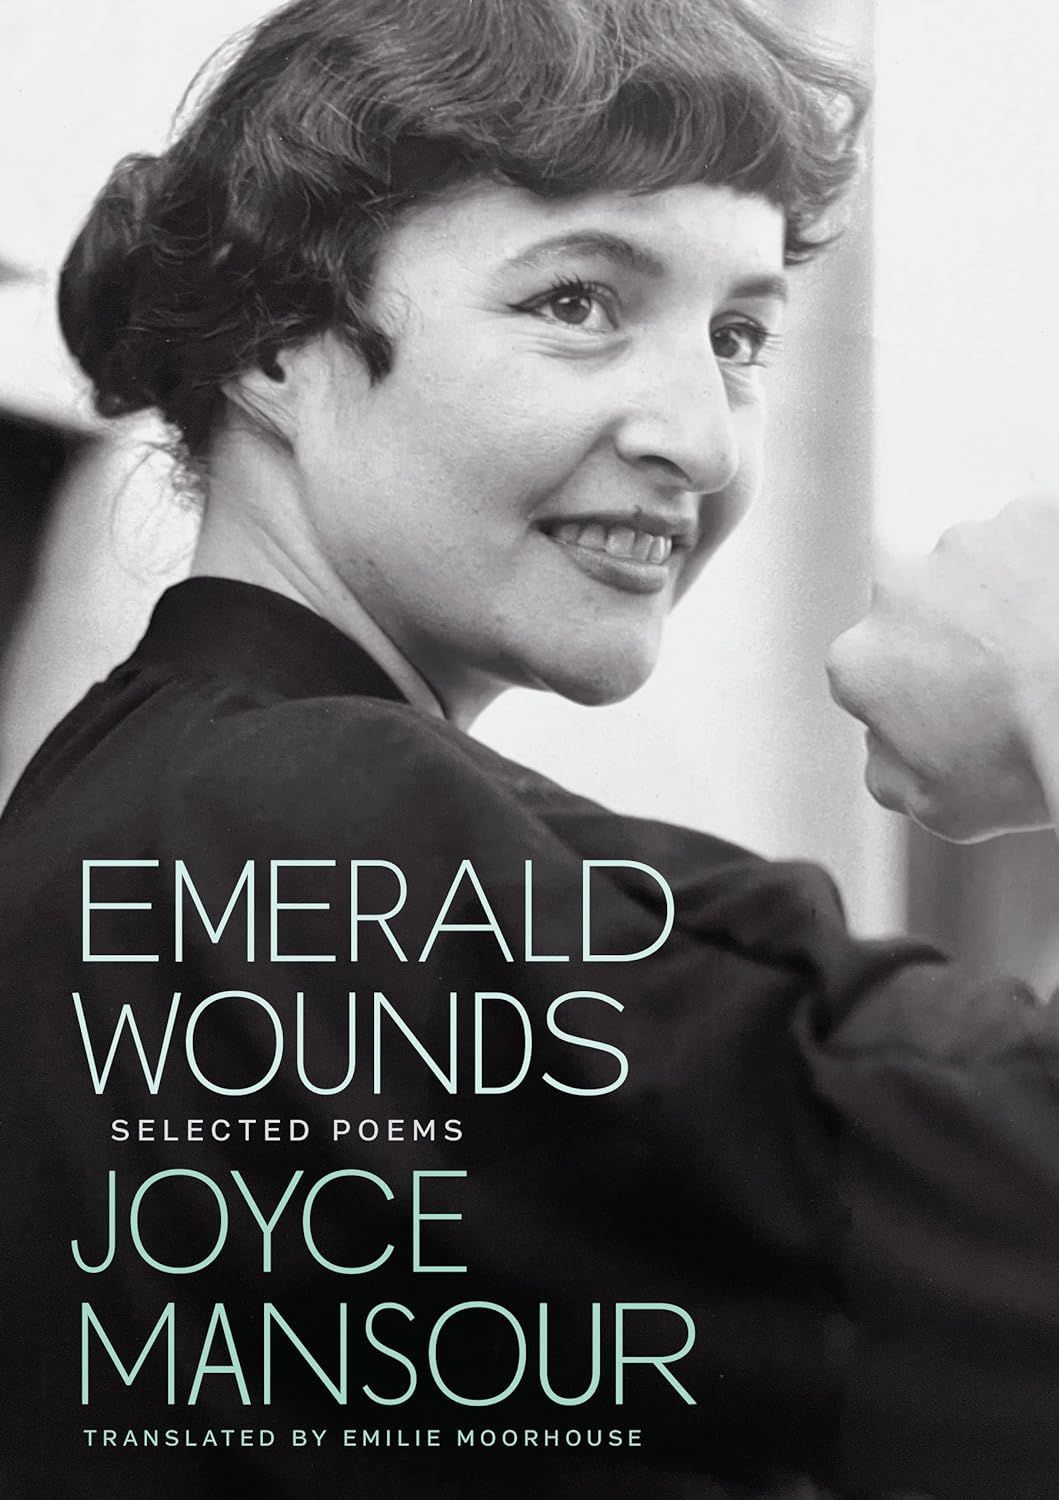 No Forbidden Places: On Joyce Mansour’s “Emerald Wounds”